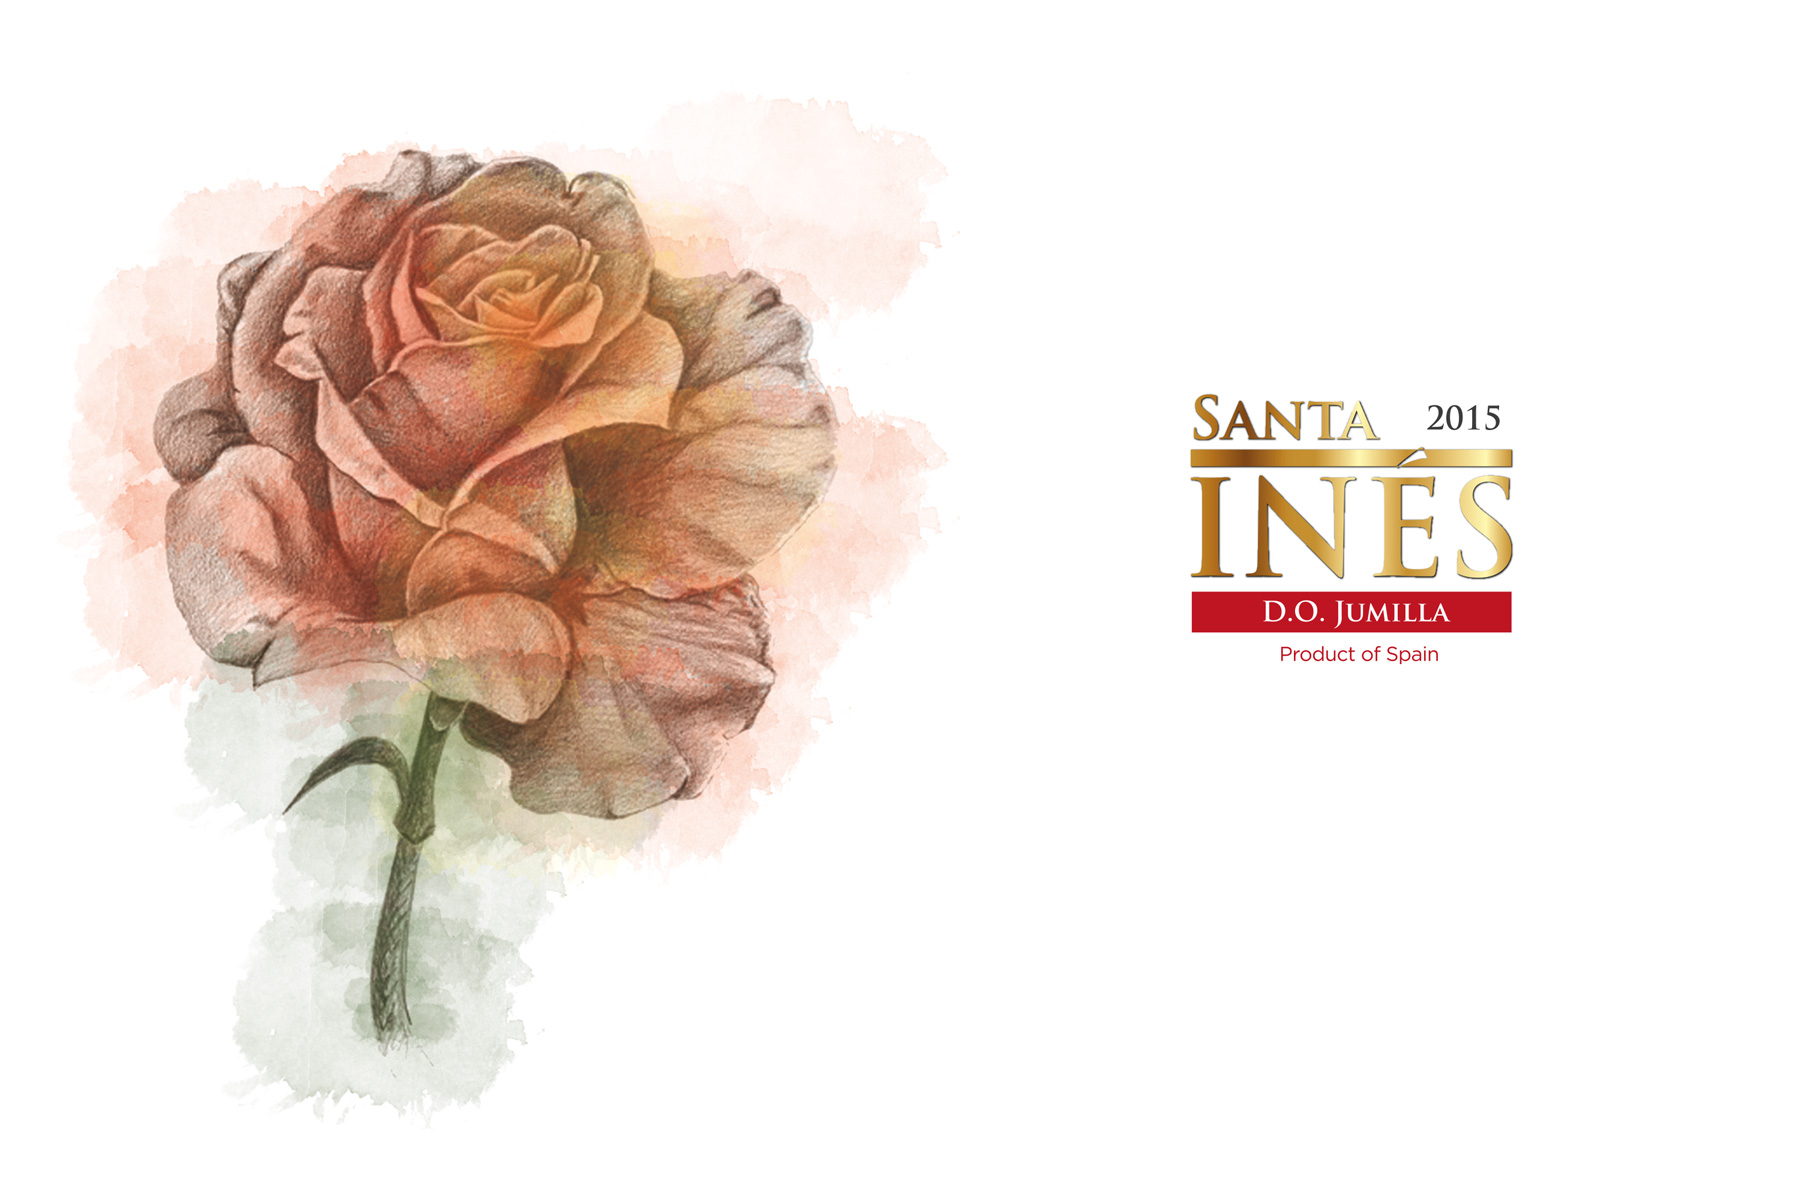 Portfolio of graphic and creative design works on wine labels and packaging for Spanish wine: SANTA INÉS for export to China